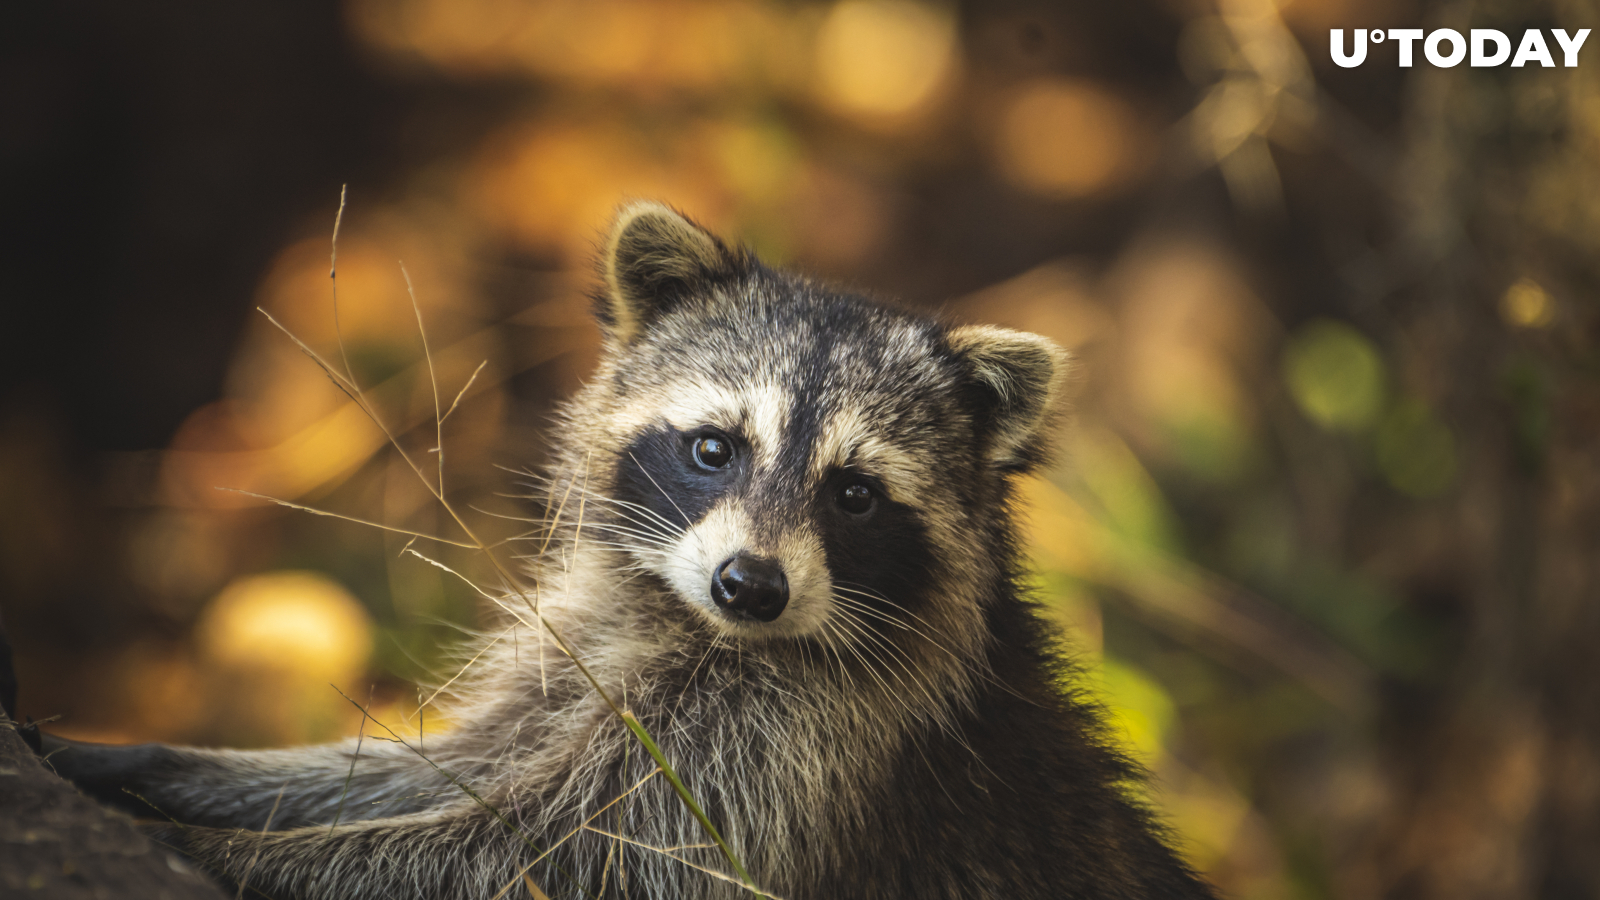 "Raccoon Stealer" Malware Is Capable of Pilfering Your Cryptocurrency Wallets